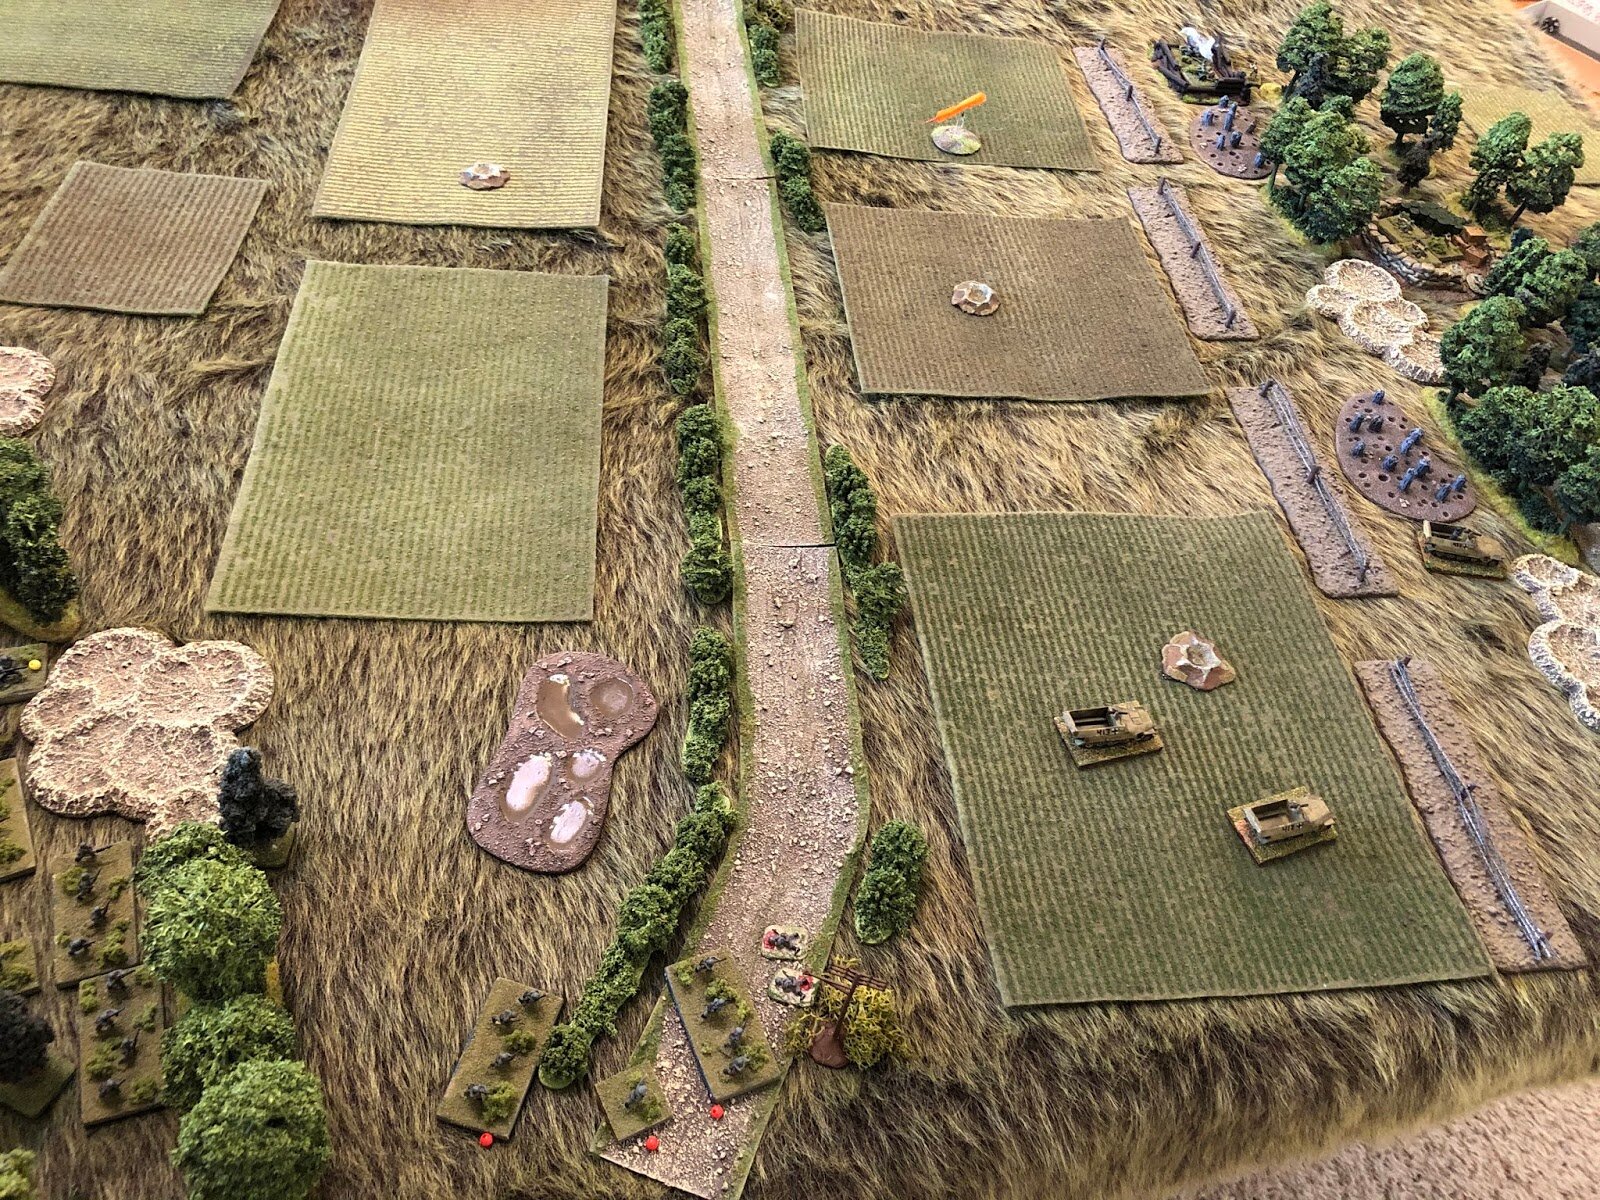  Unable to get their brothers from 1st Platoon, 1st Company (bottom center left, with 2nd Platoon at bottom left), moving, 3rd Platoon gets moving towards the southwest woods in their halftracks, with their PC getting through the gap in the wire (far